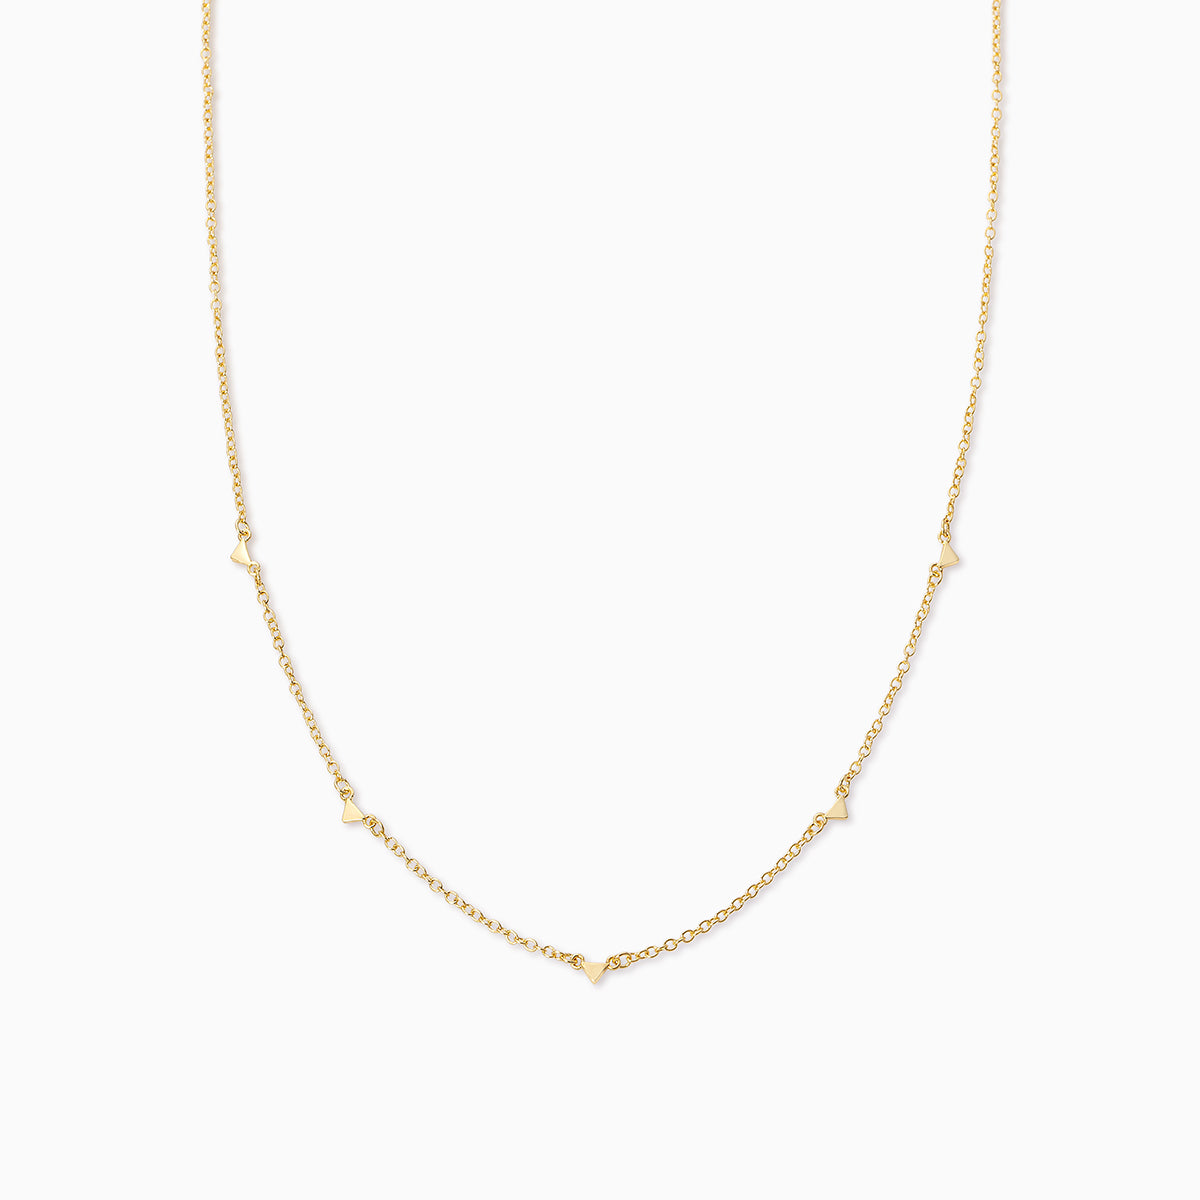 Textured Stud Necklace | Gold | Product Image | Uncommon James